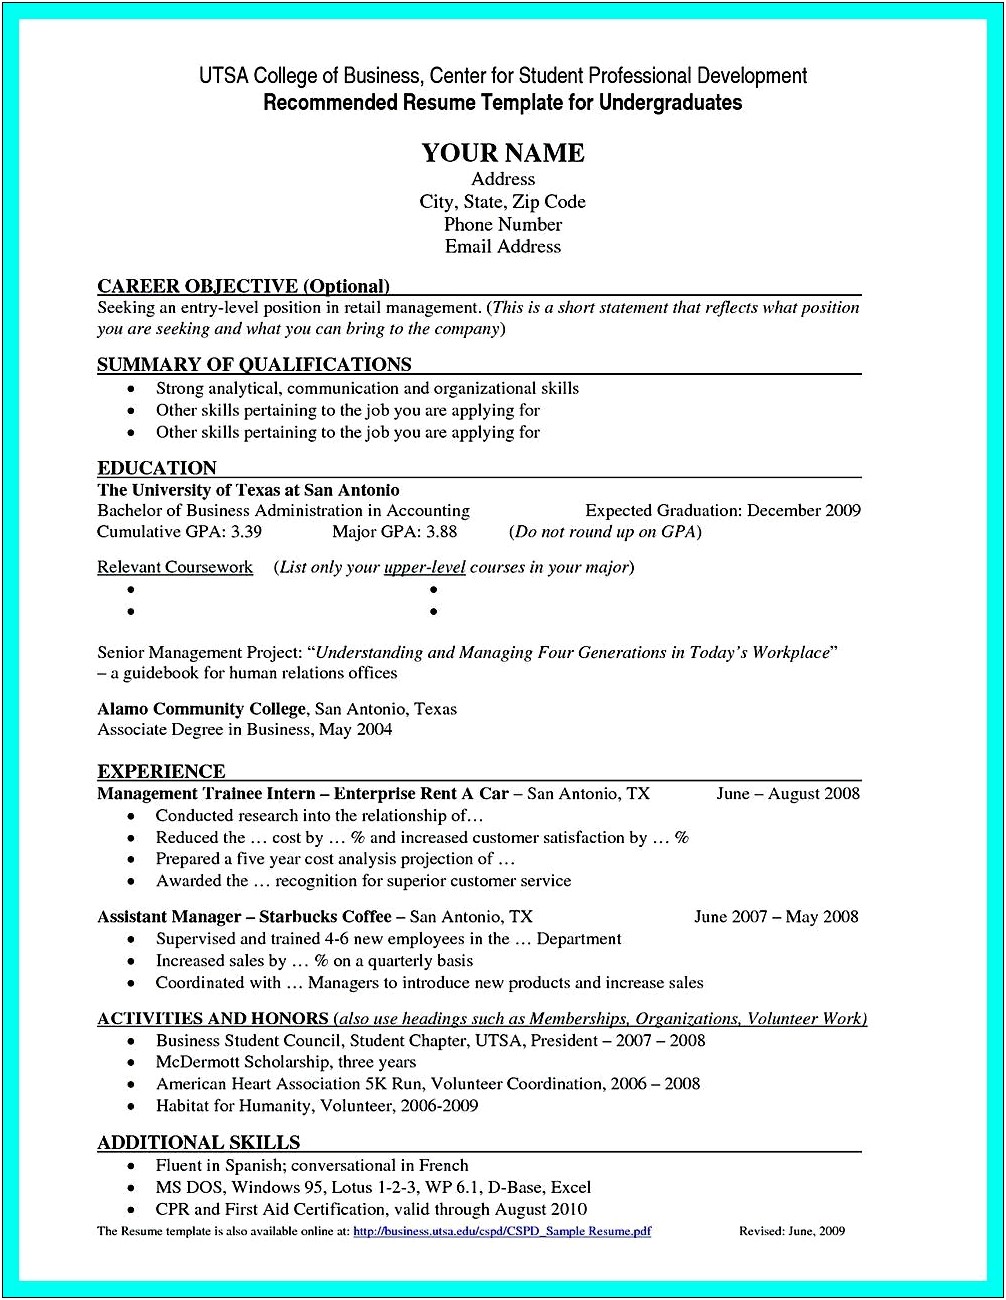 Resume Duties For Rental Facility Manager